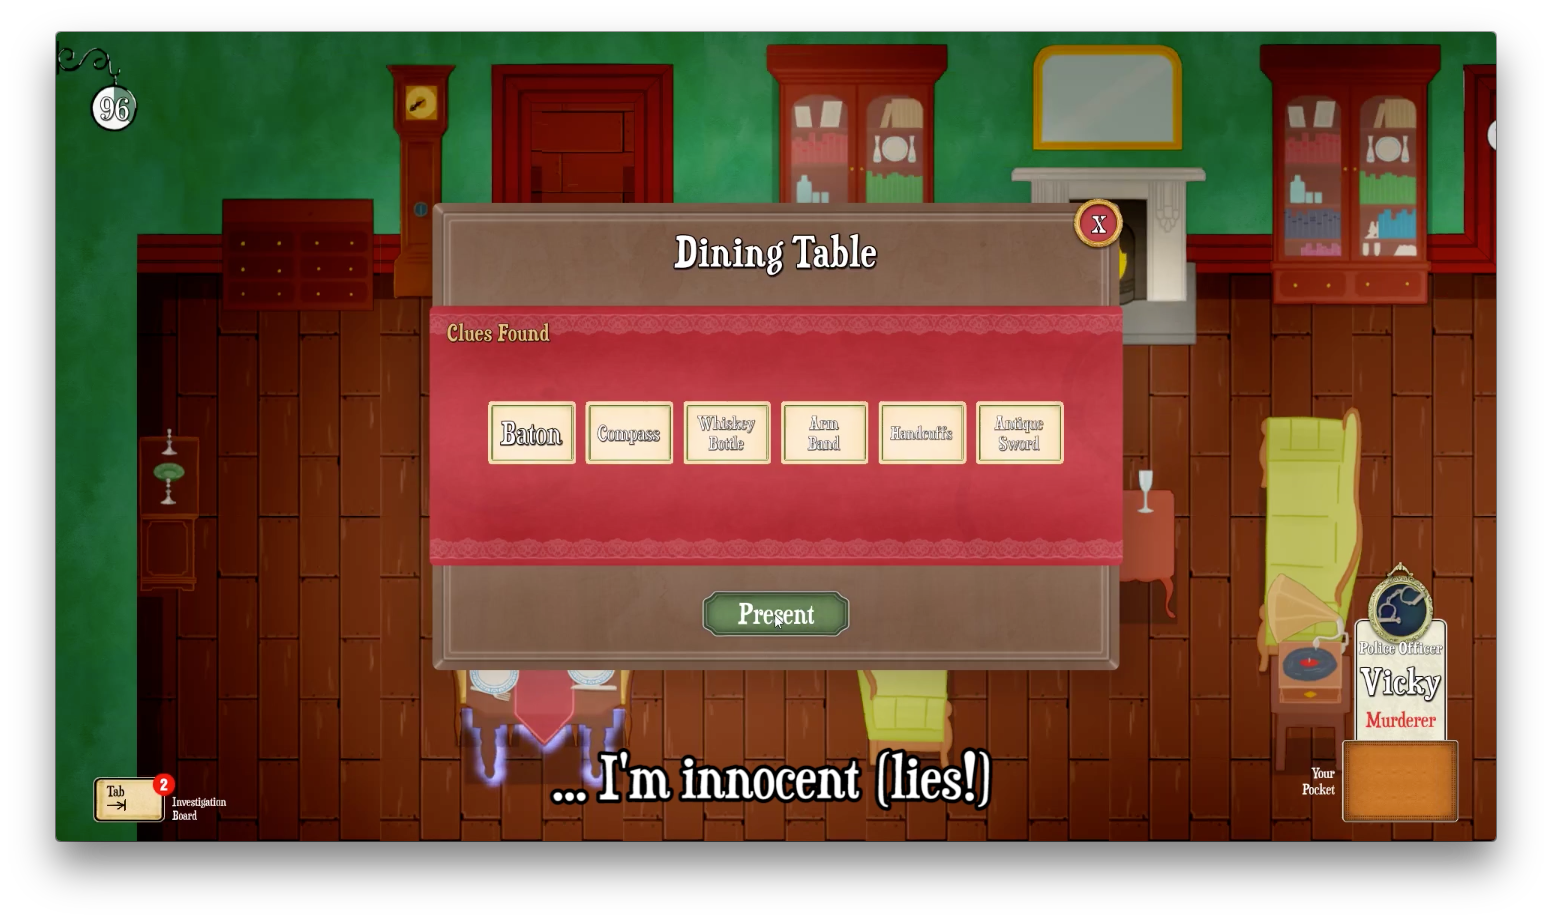 Murder At Malone Manor - gameplay screenshot of our multiplayer murder mystery PC game